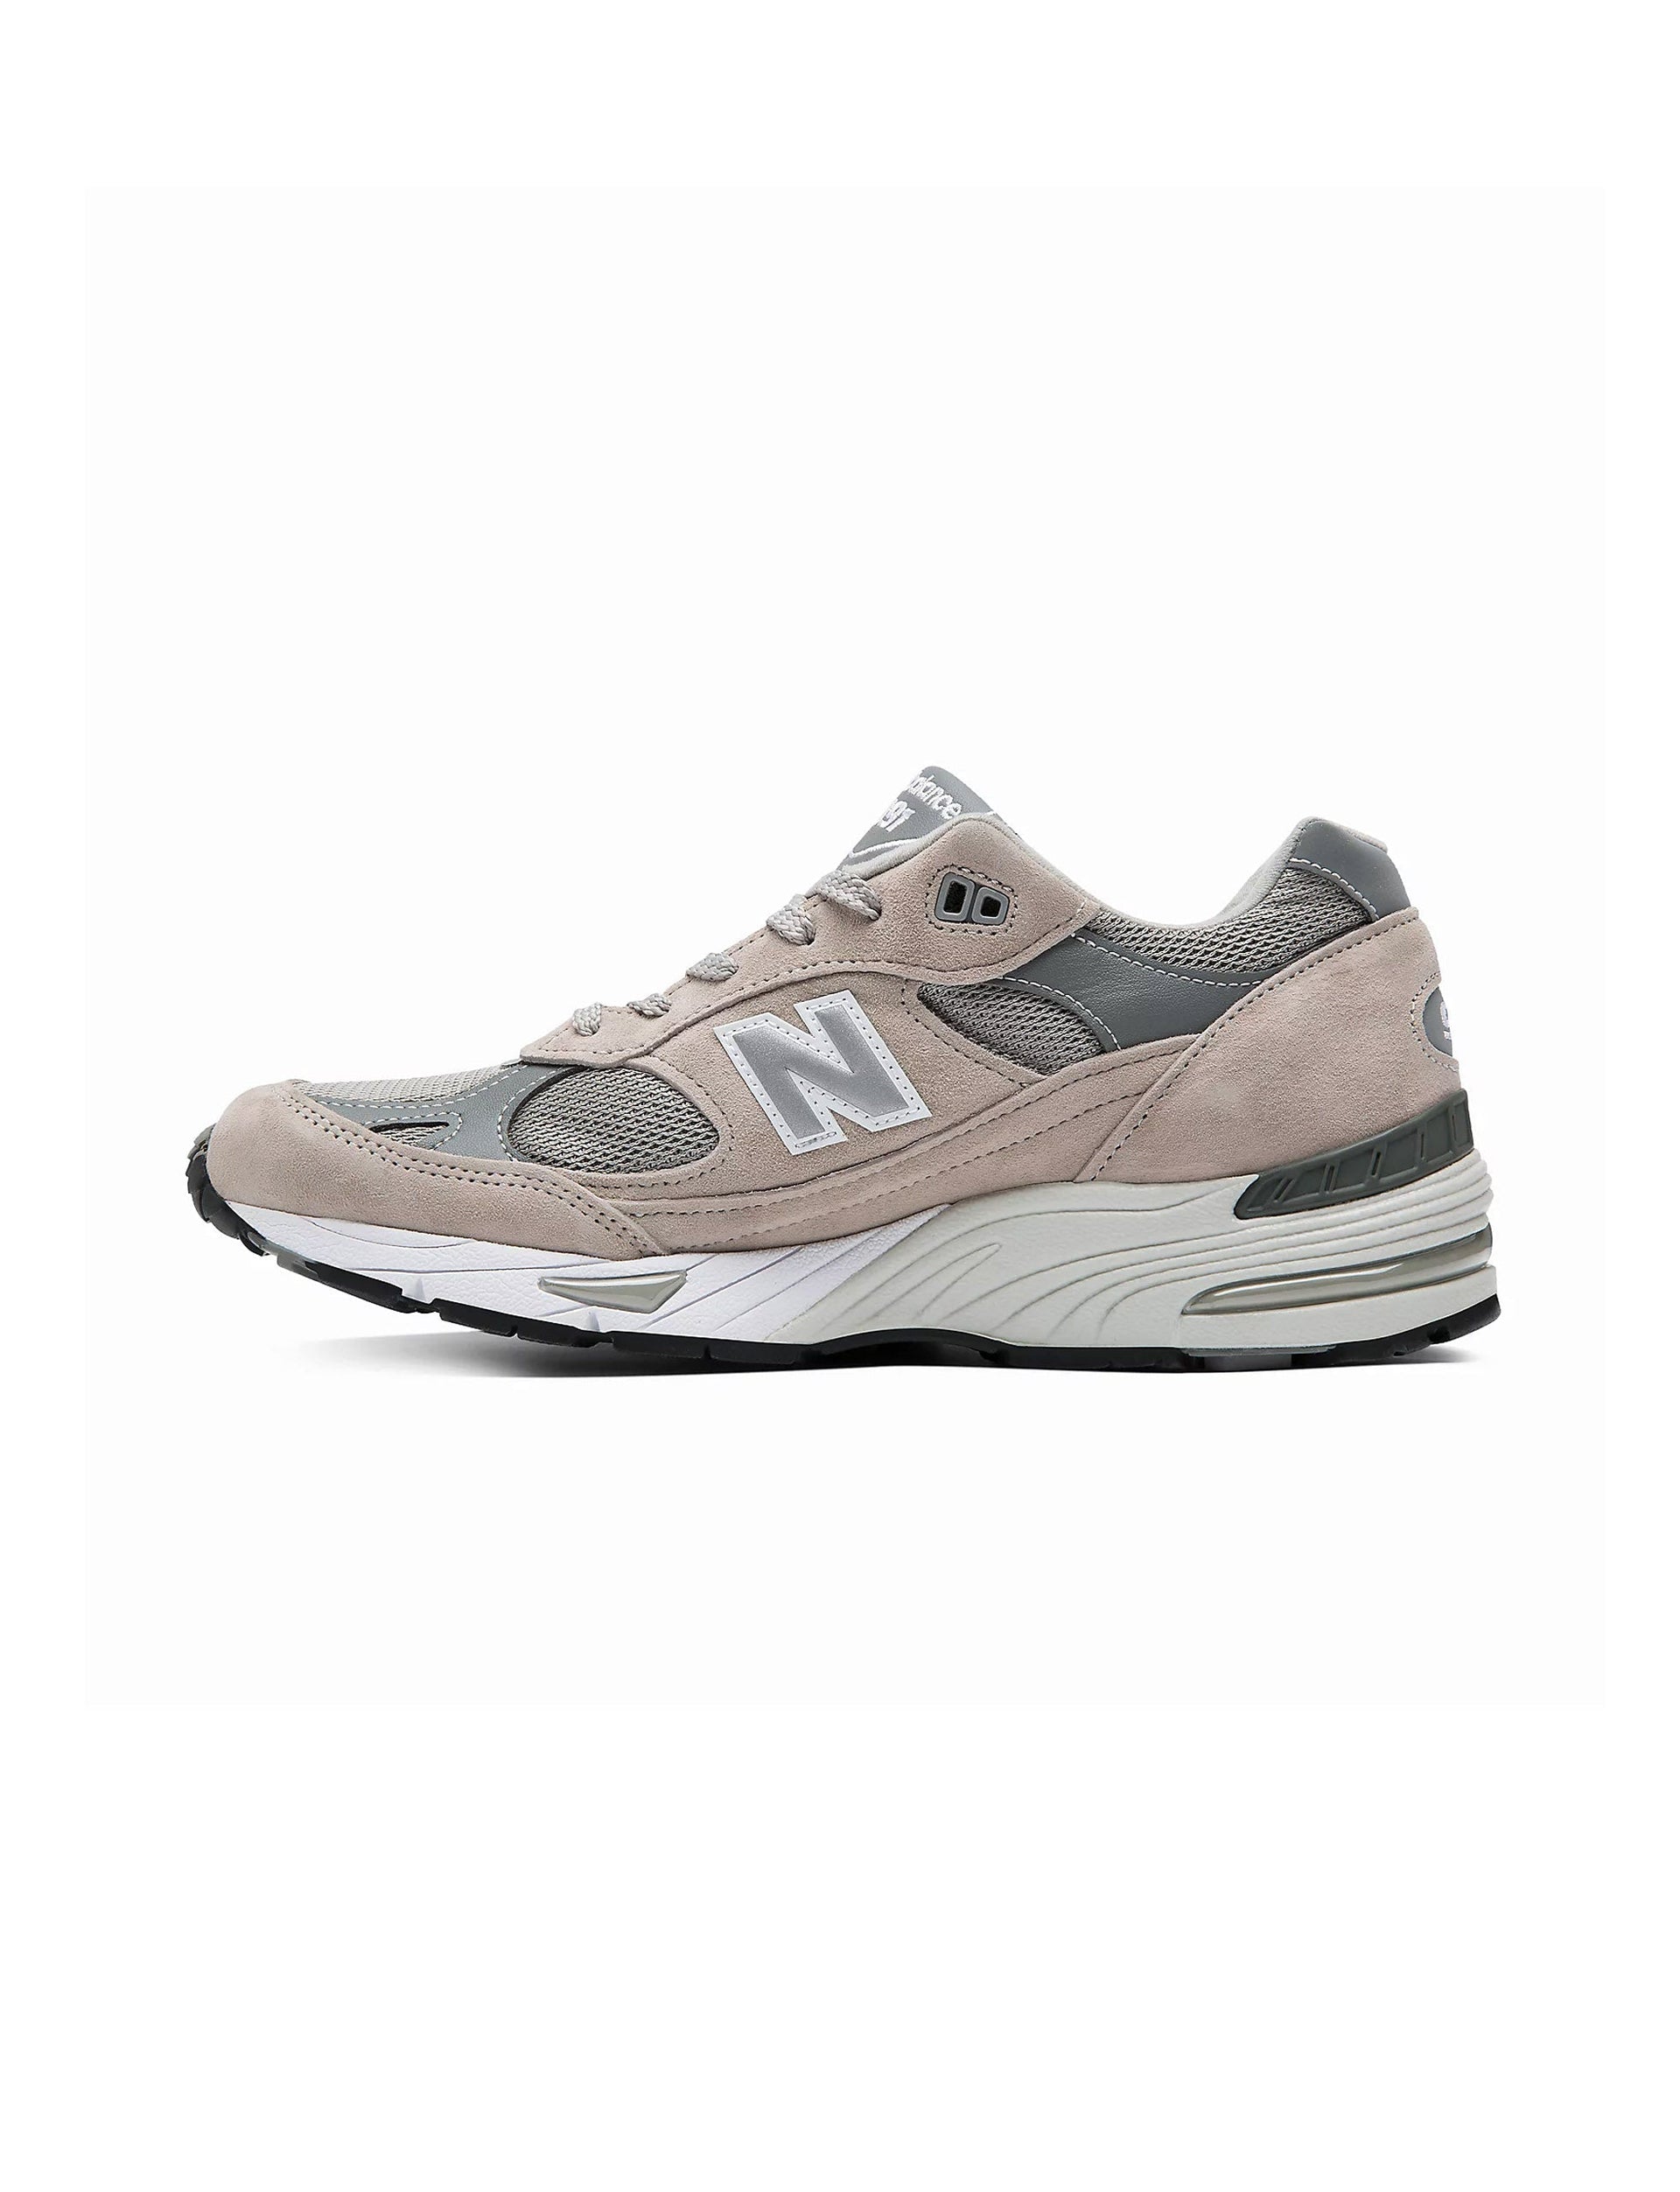 NEW BALANCE Made in the UK 991 GREY